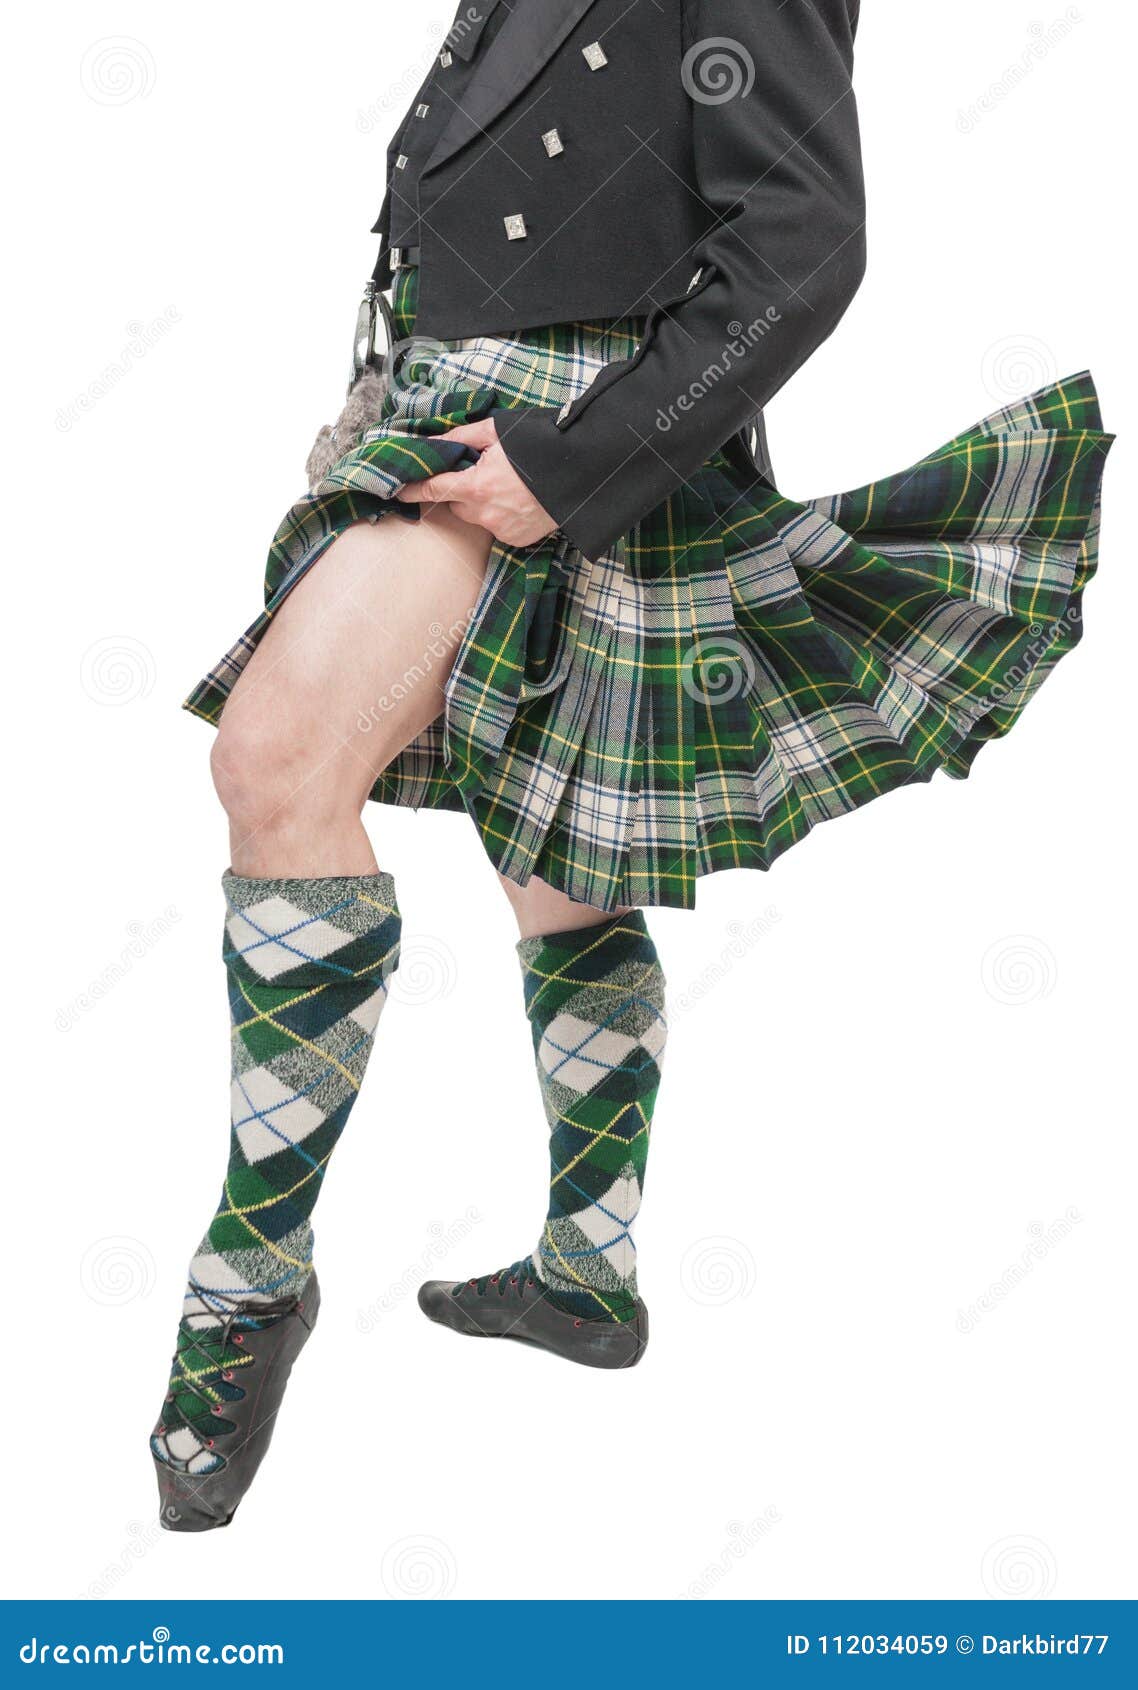 In kilts scottish men sexy With 'Men